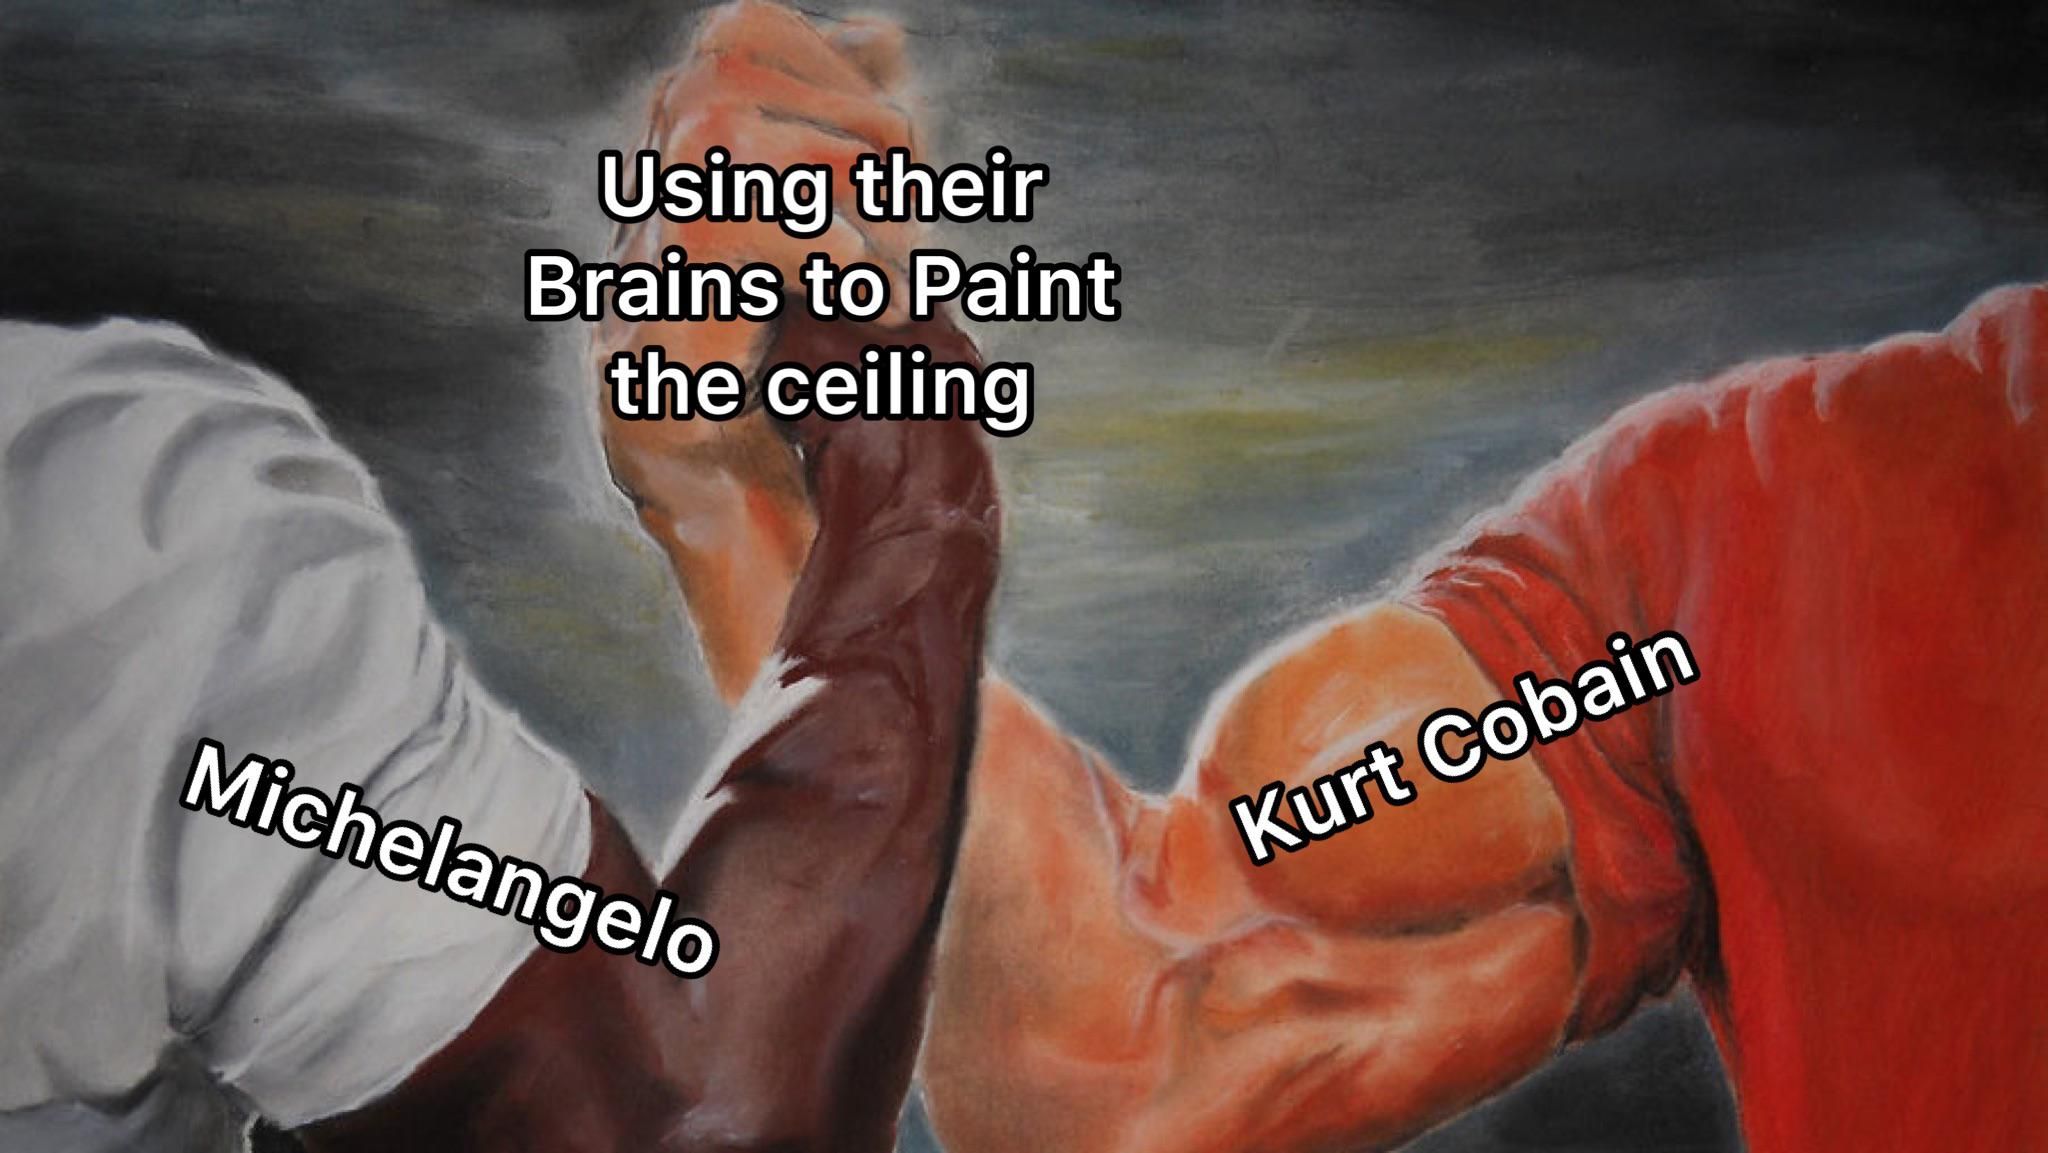 We need more music and art memes on this sub